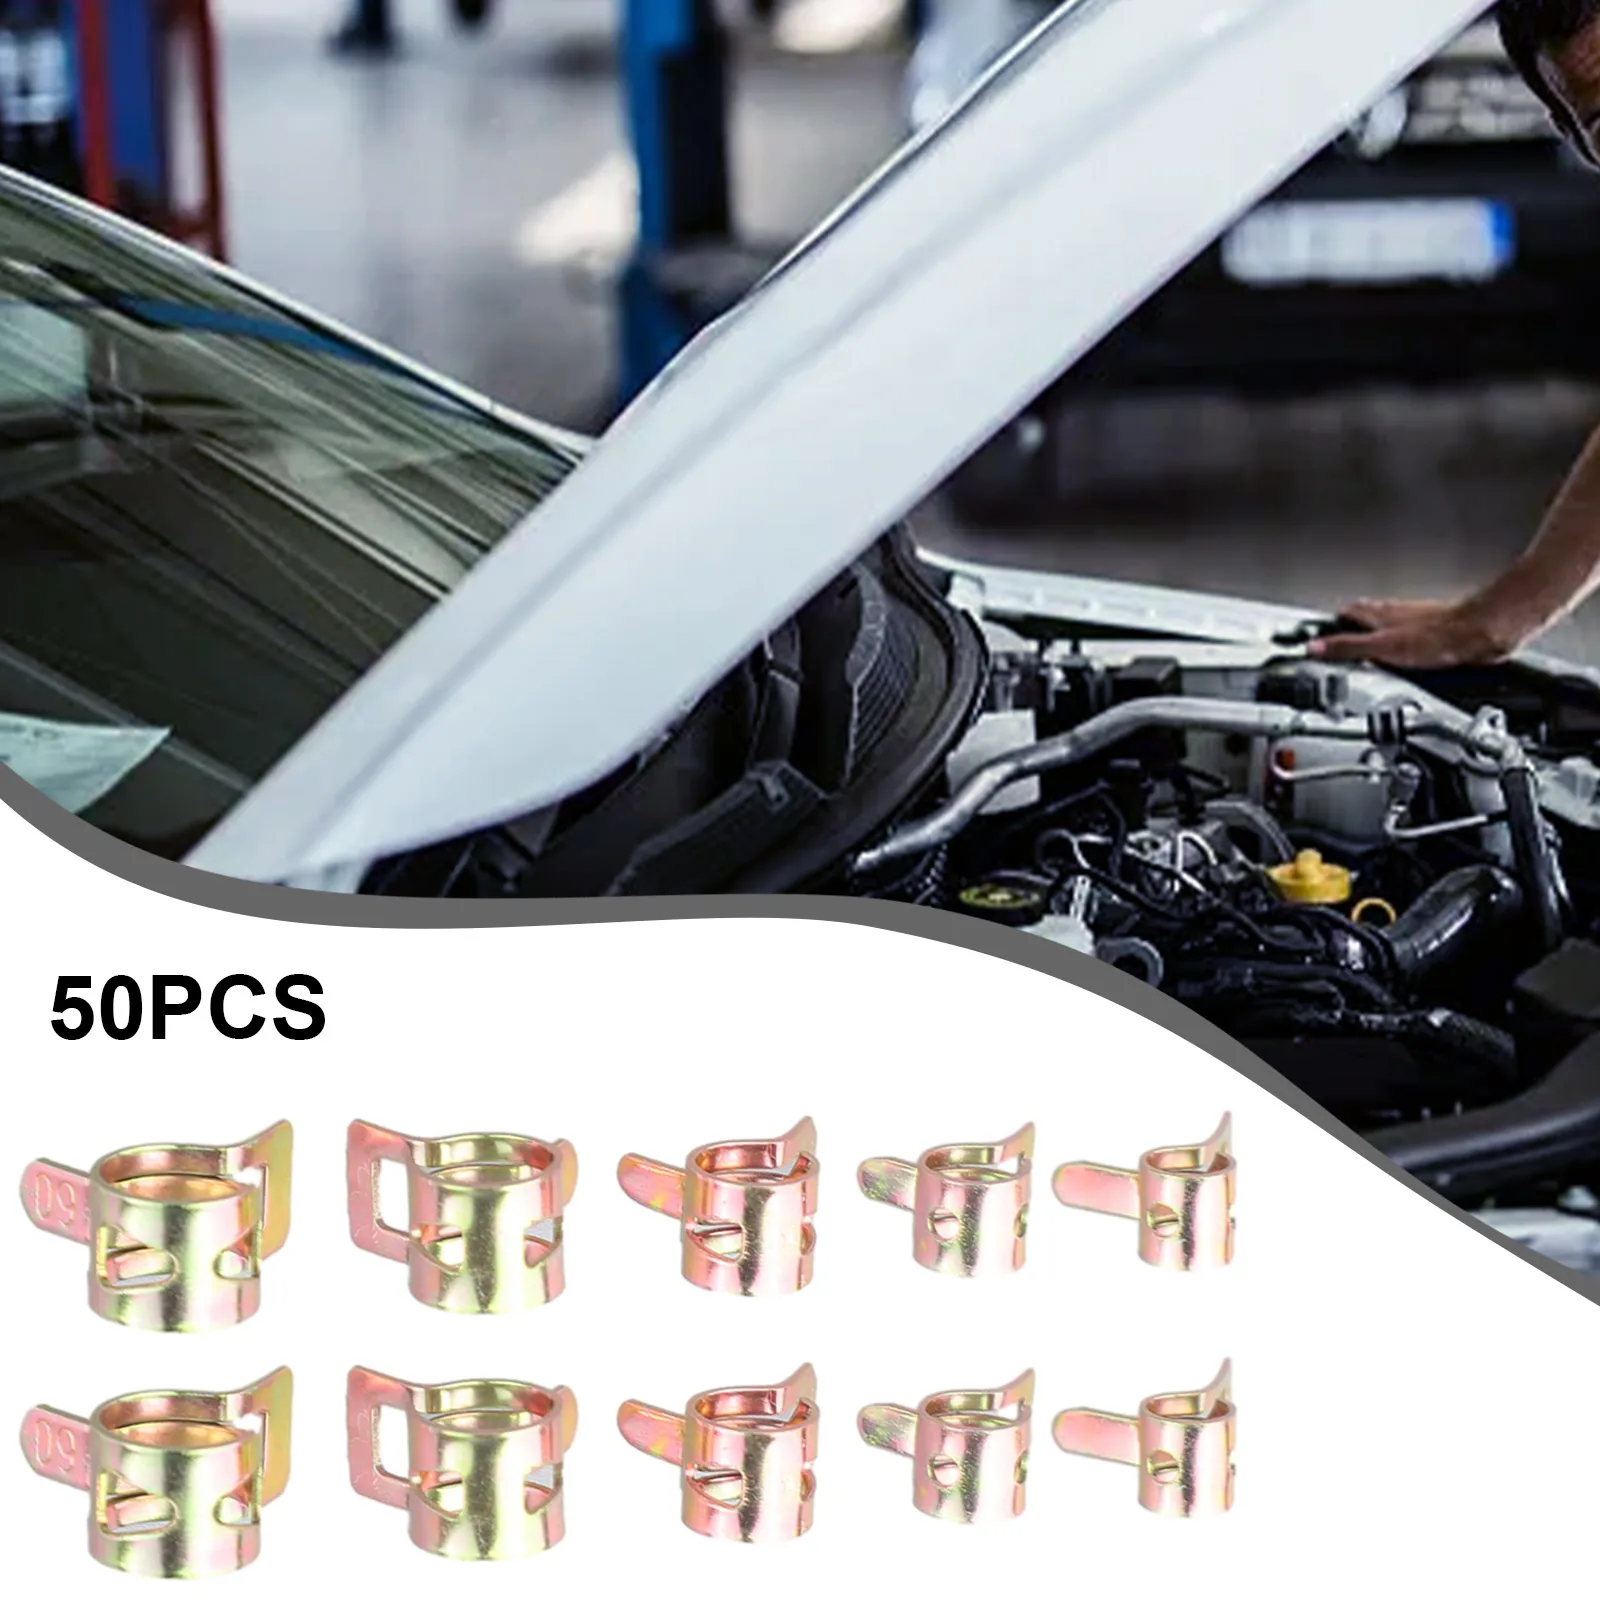 

50pcs/set Car Spring Clips Fastener 5/6/7/8/9mm Spring Clip Fuel Water Line Hose Pipe Air Tube Clamps Auto Accessories